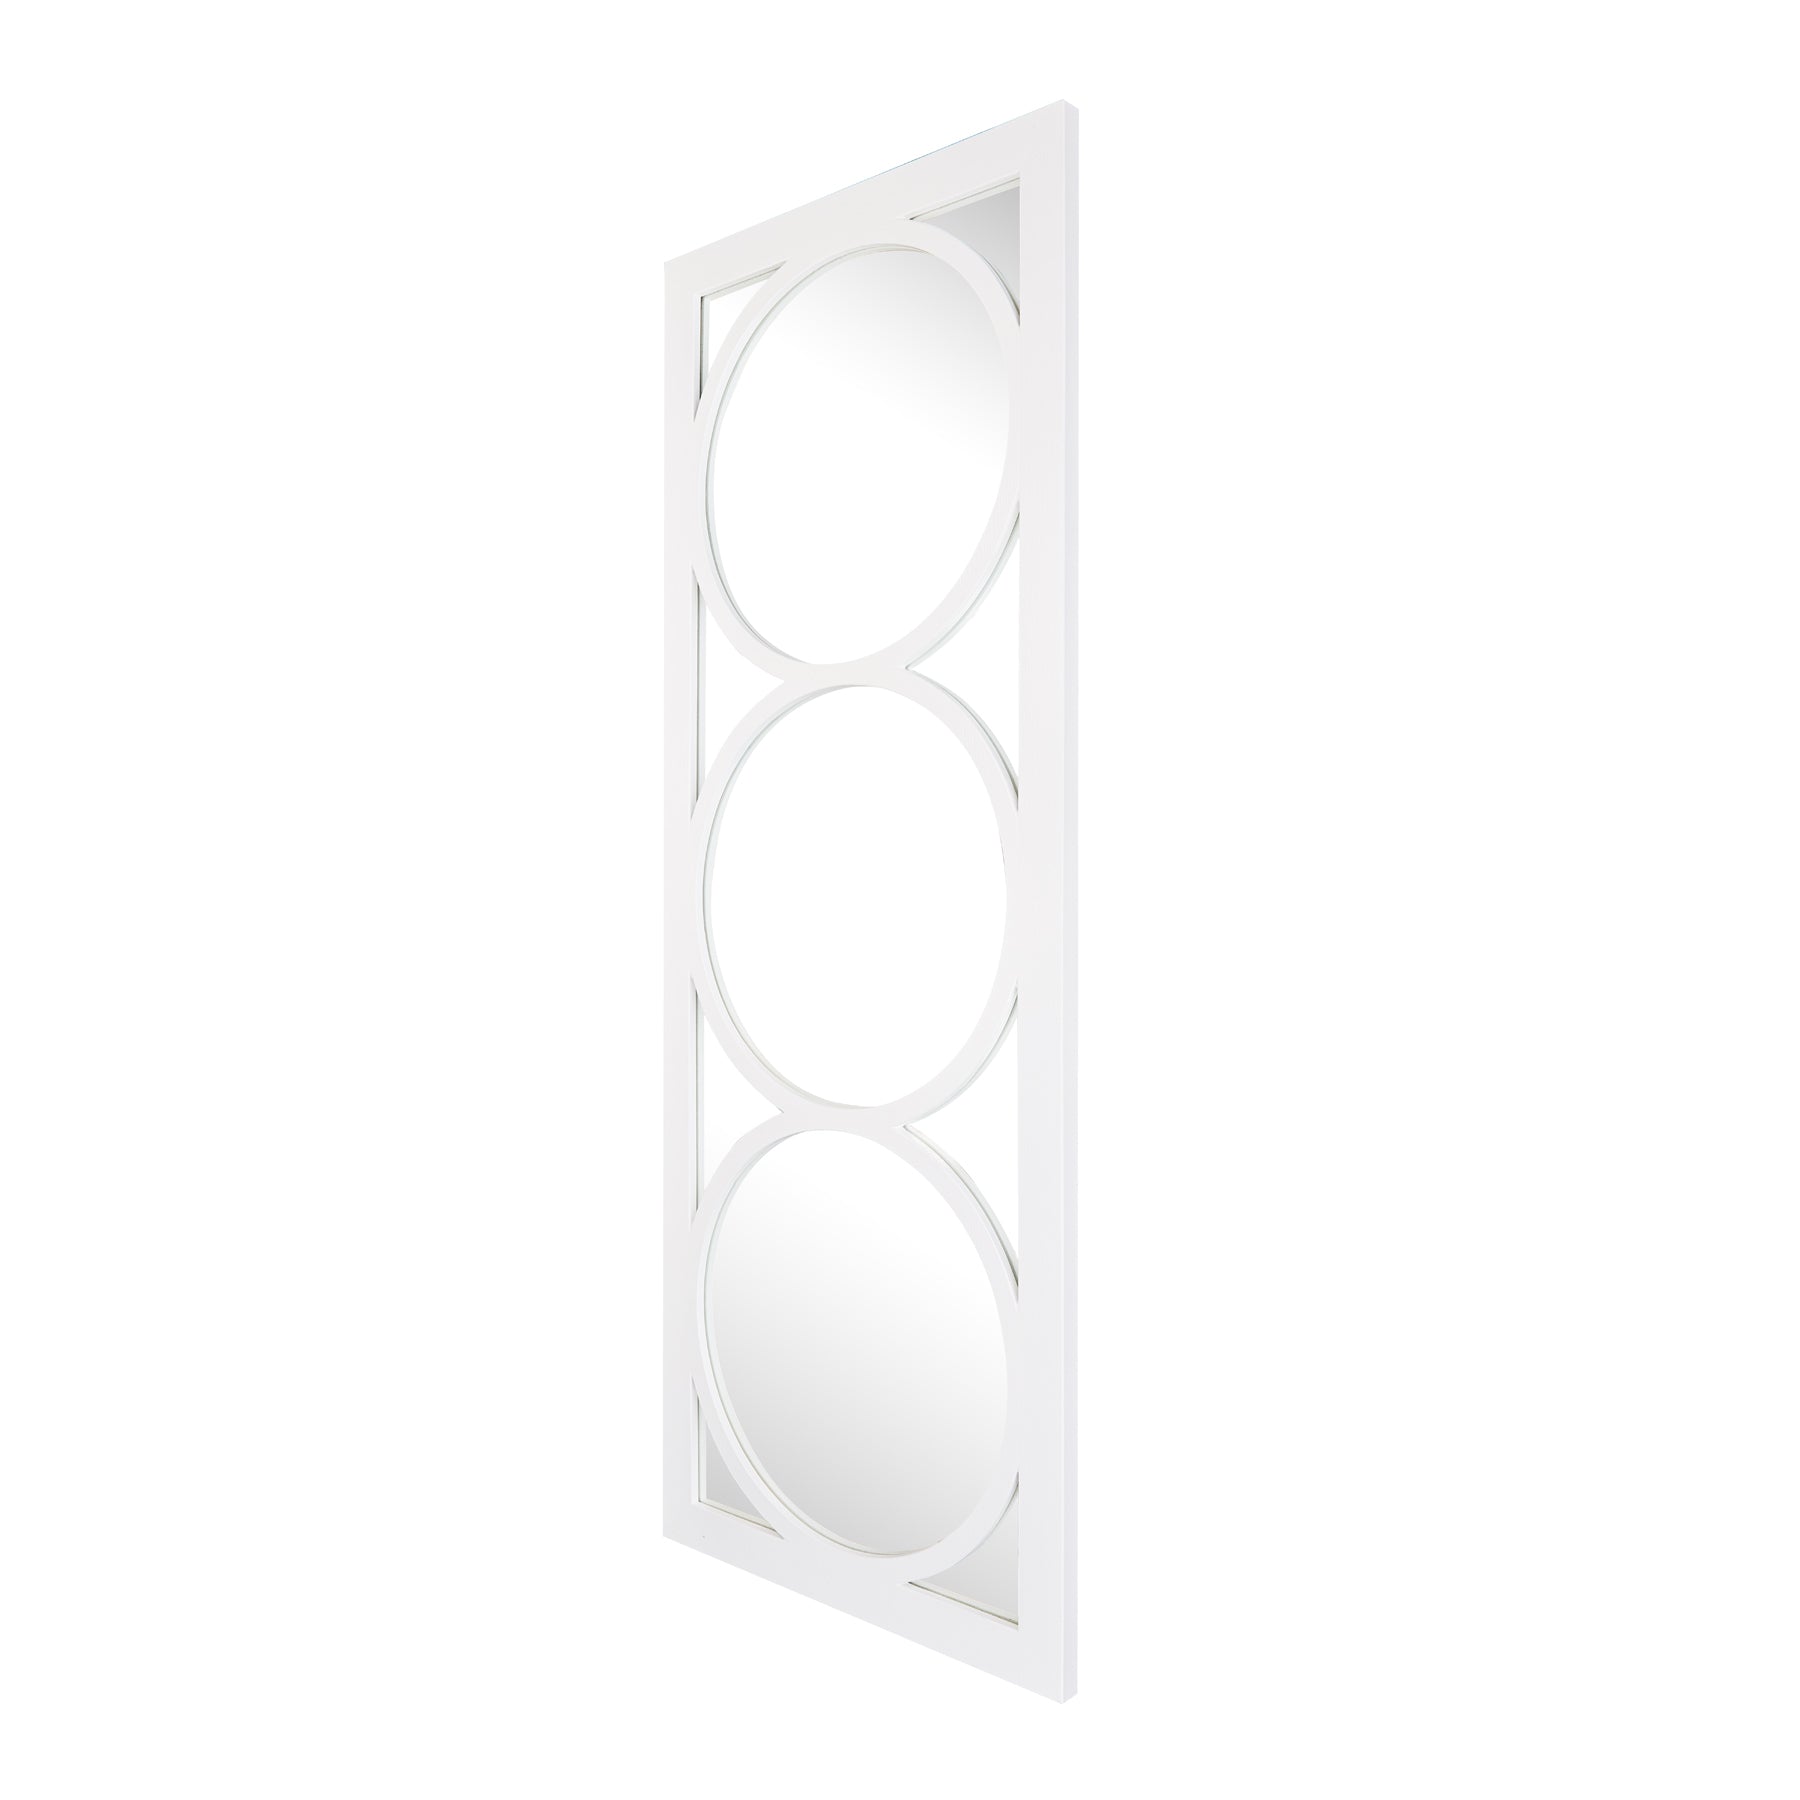 Artic Moon Mirror - White Finish - Paramount Mirrors and Prints